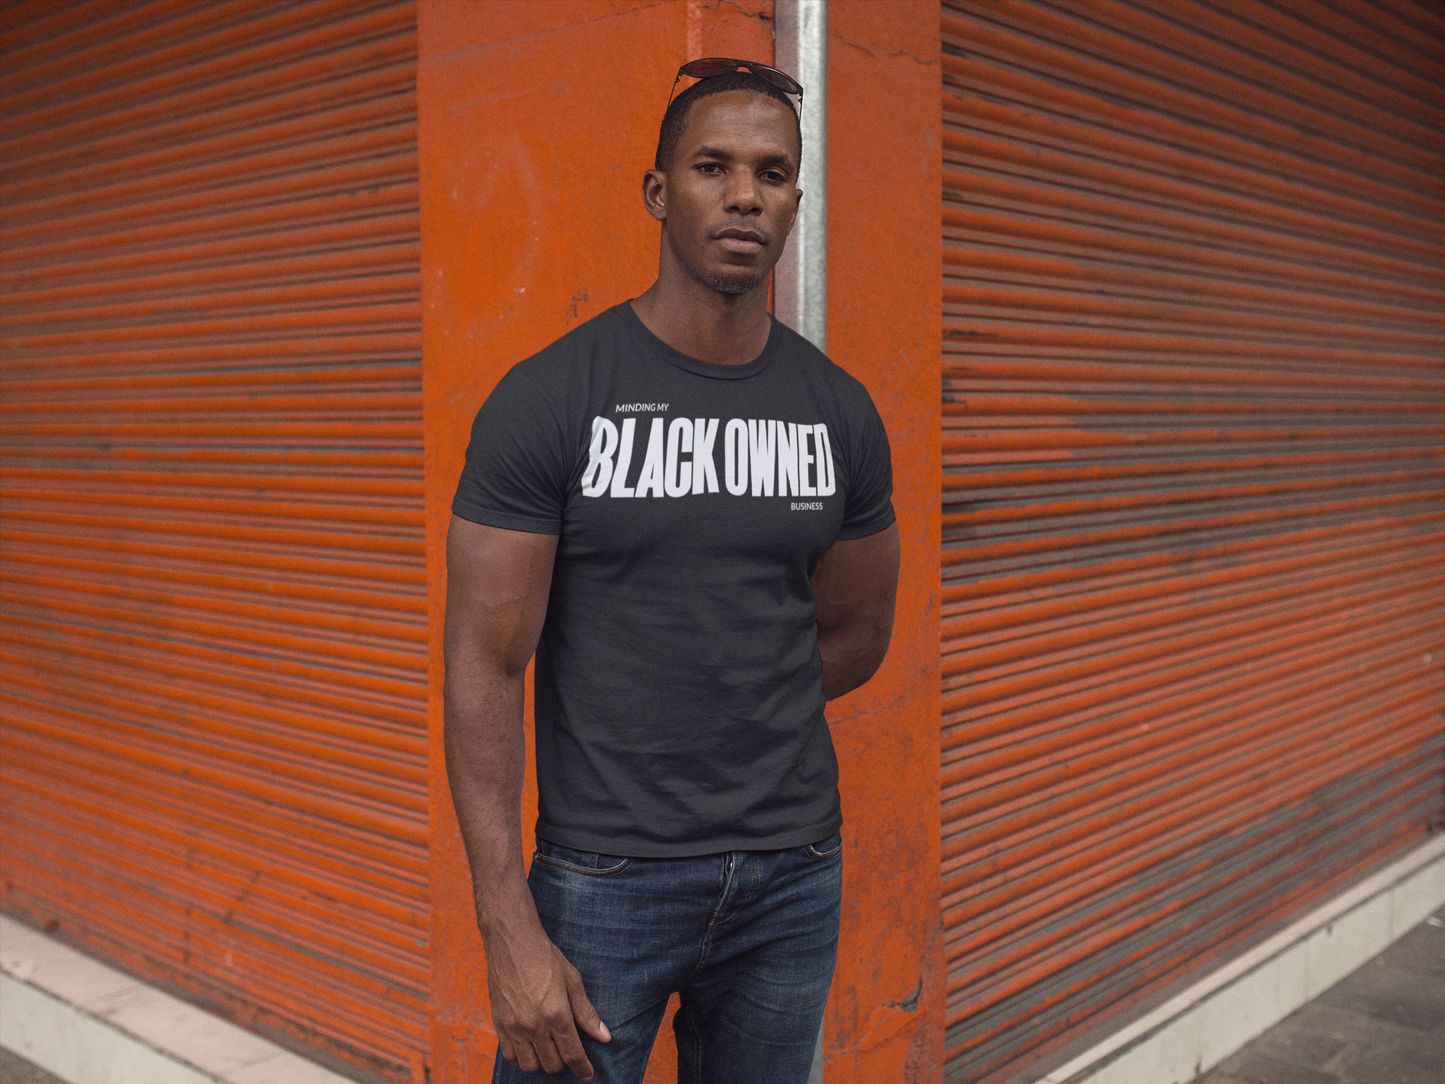 Unisex Black Owned Tee (with white text)